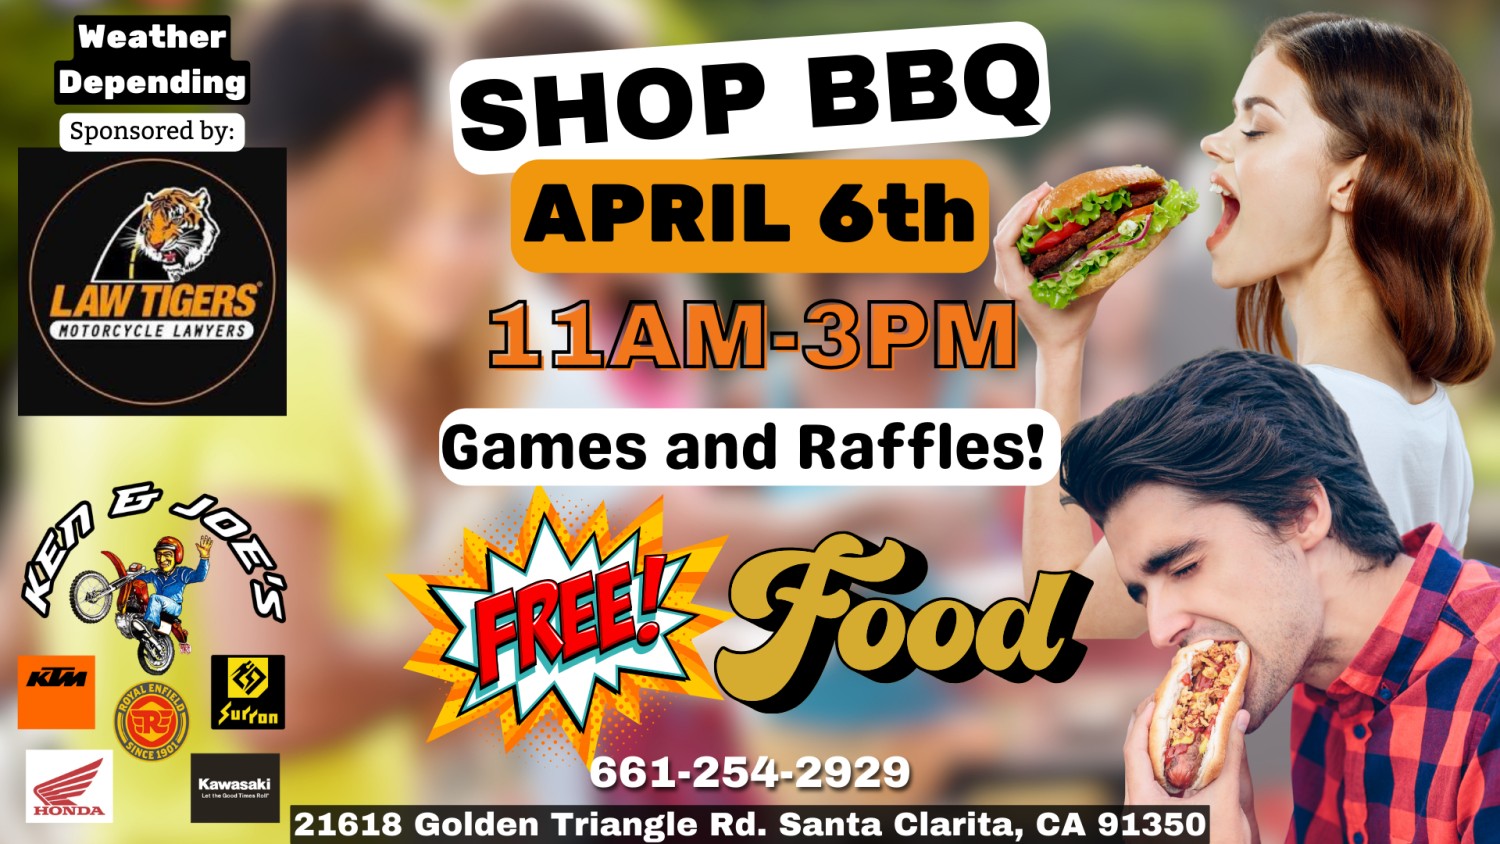 SHOP BBQ sponsored by LAW TIGERS LOS ANGELES